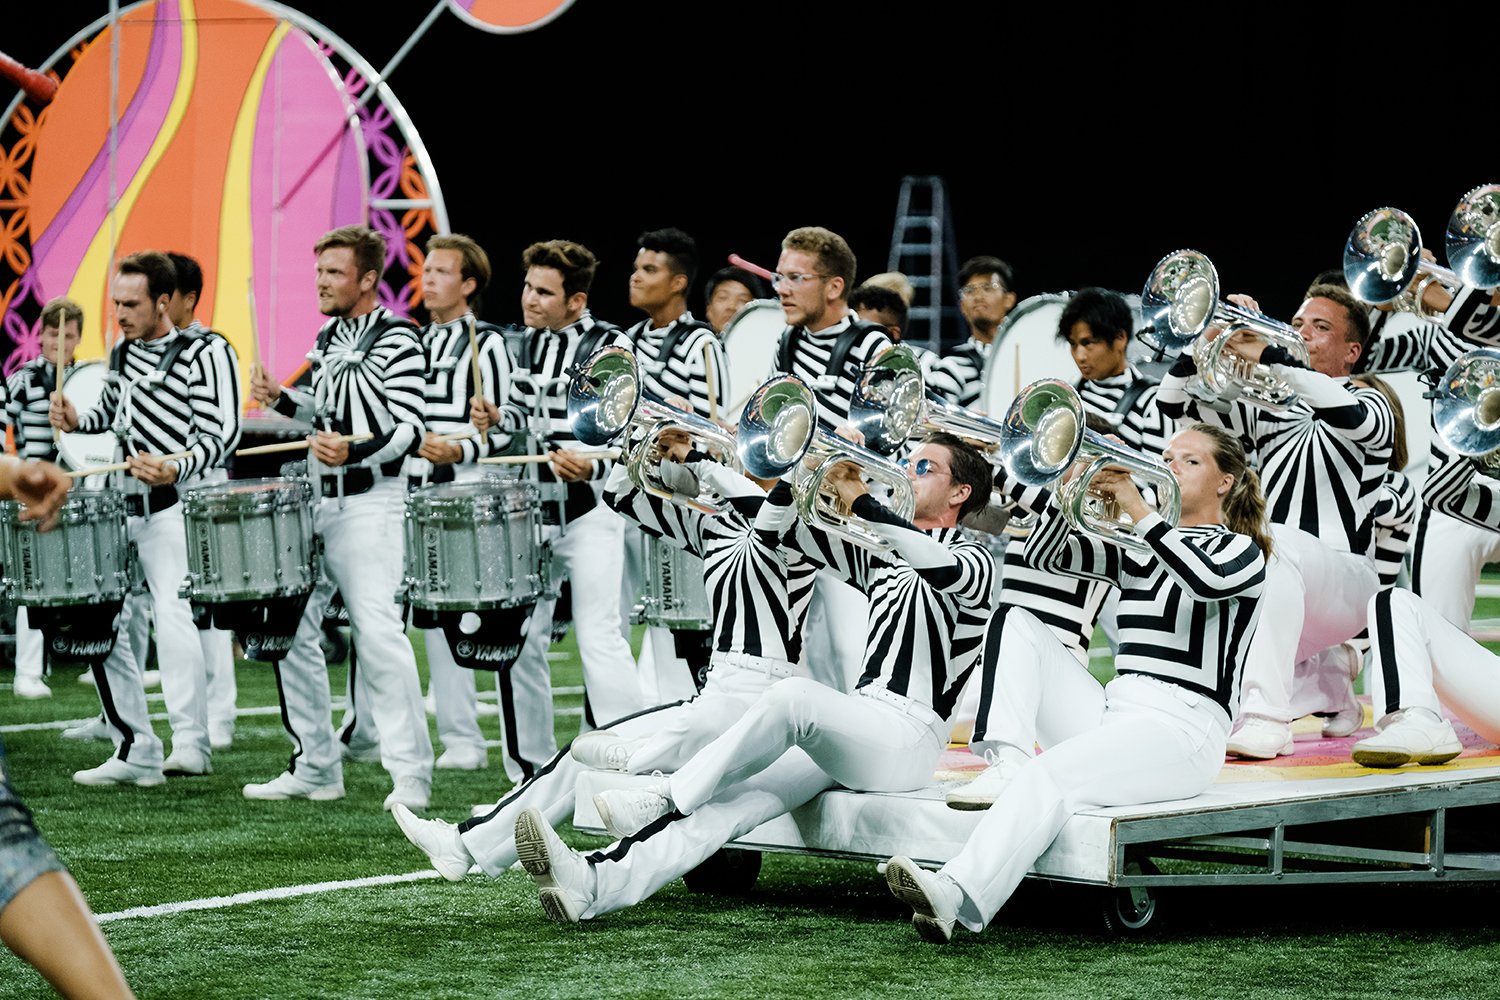 The Bluecoats top the charts at - Drum Corps International